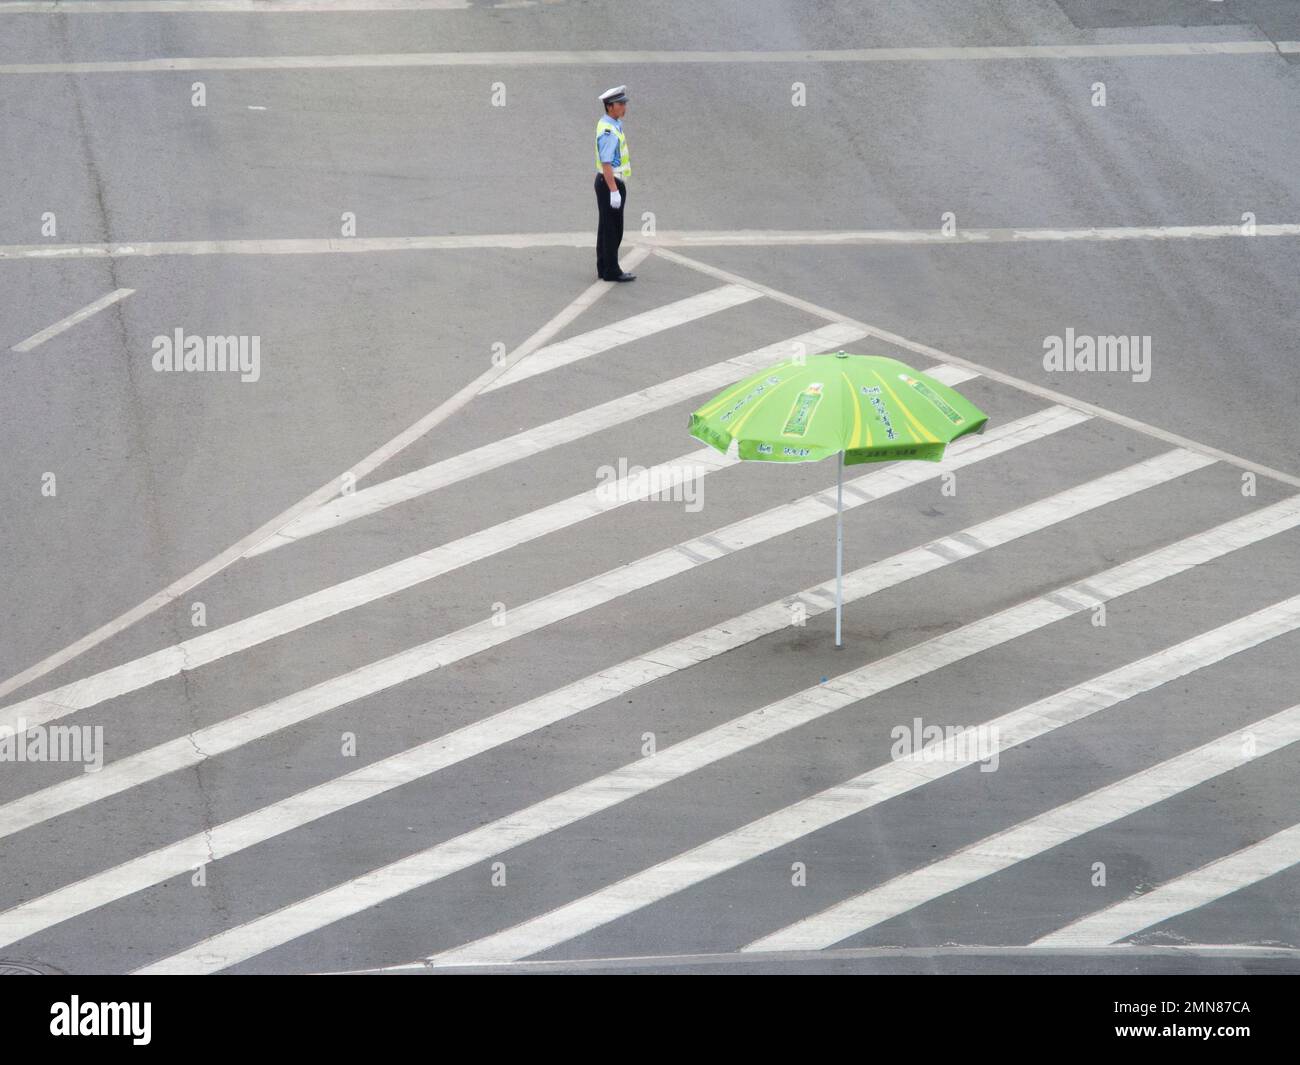 Somewhat isolated and perhaps lonely traffic officer policeman at a road junction in the Chinese city of Xi'an. PRC. China. Guiding and directing a small amount of traffic but looking exposed. He has a large parasol umbrella for shade should he need it. (125) Stock Photo